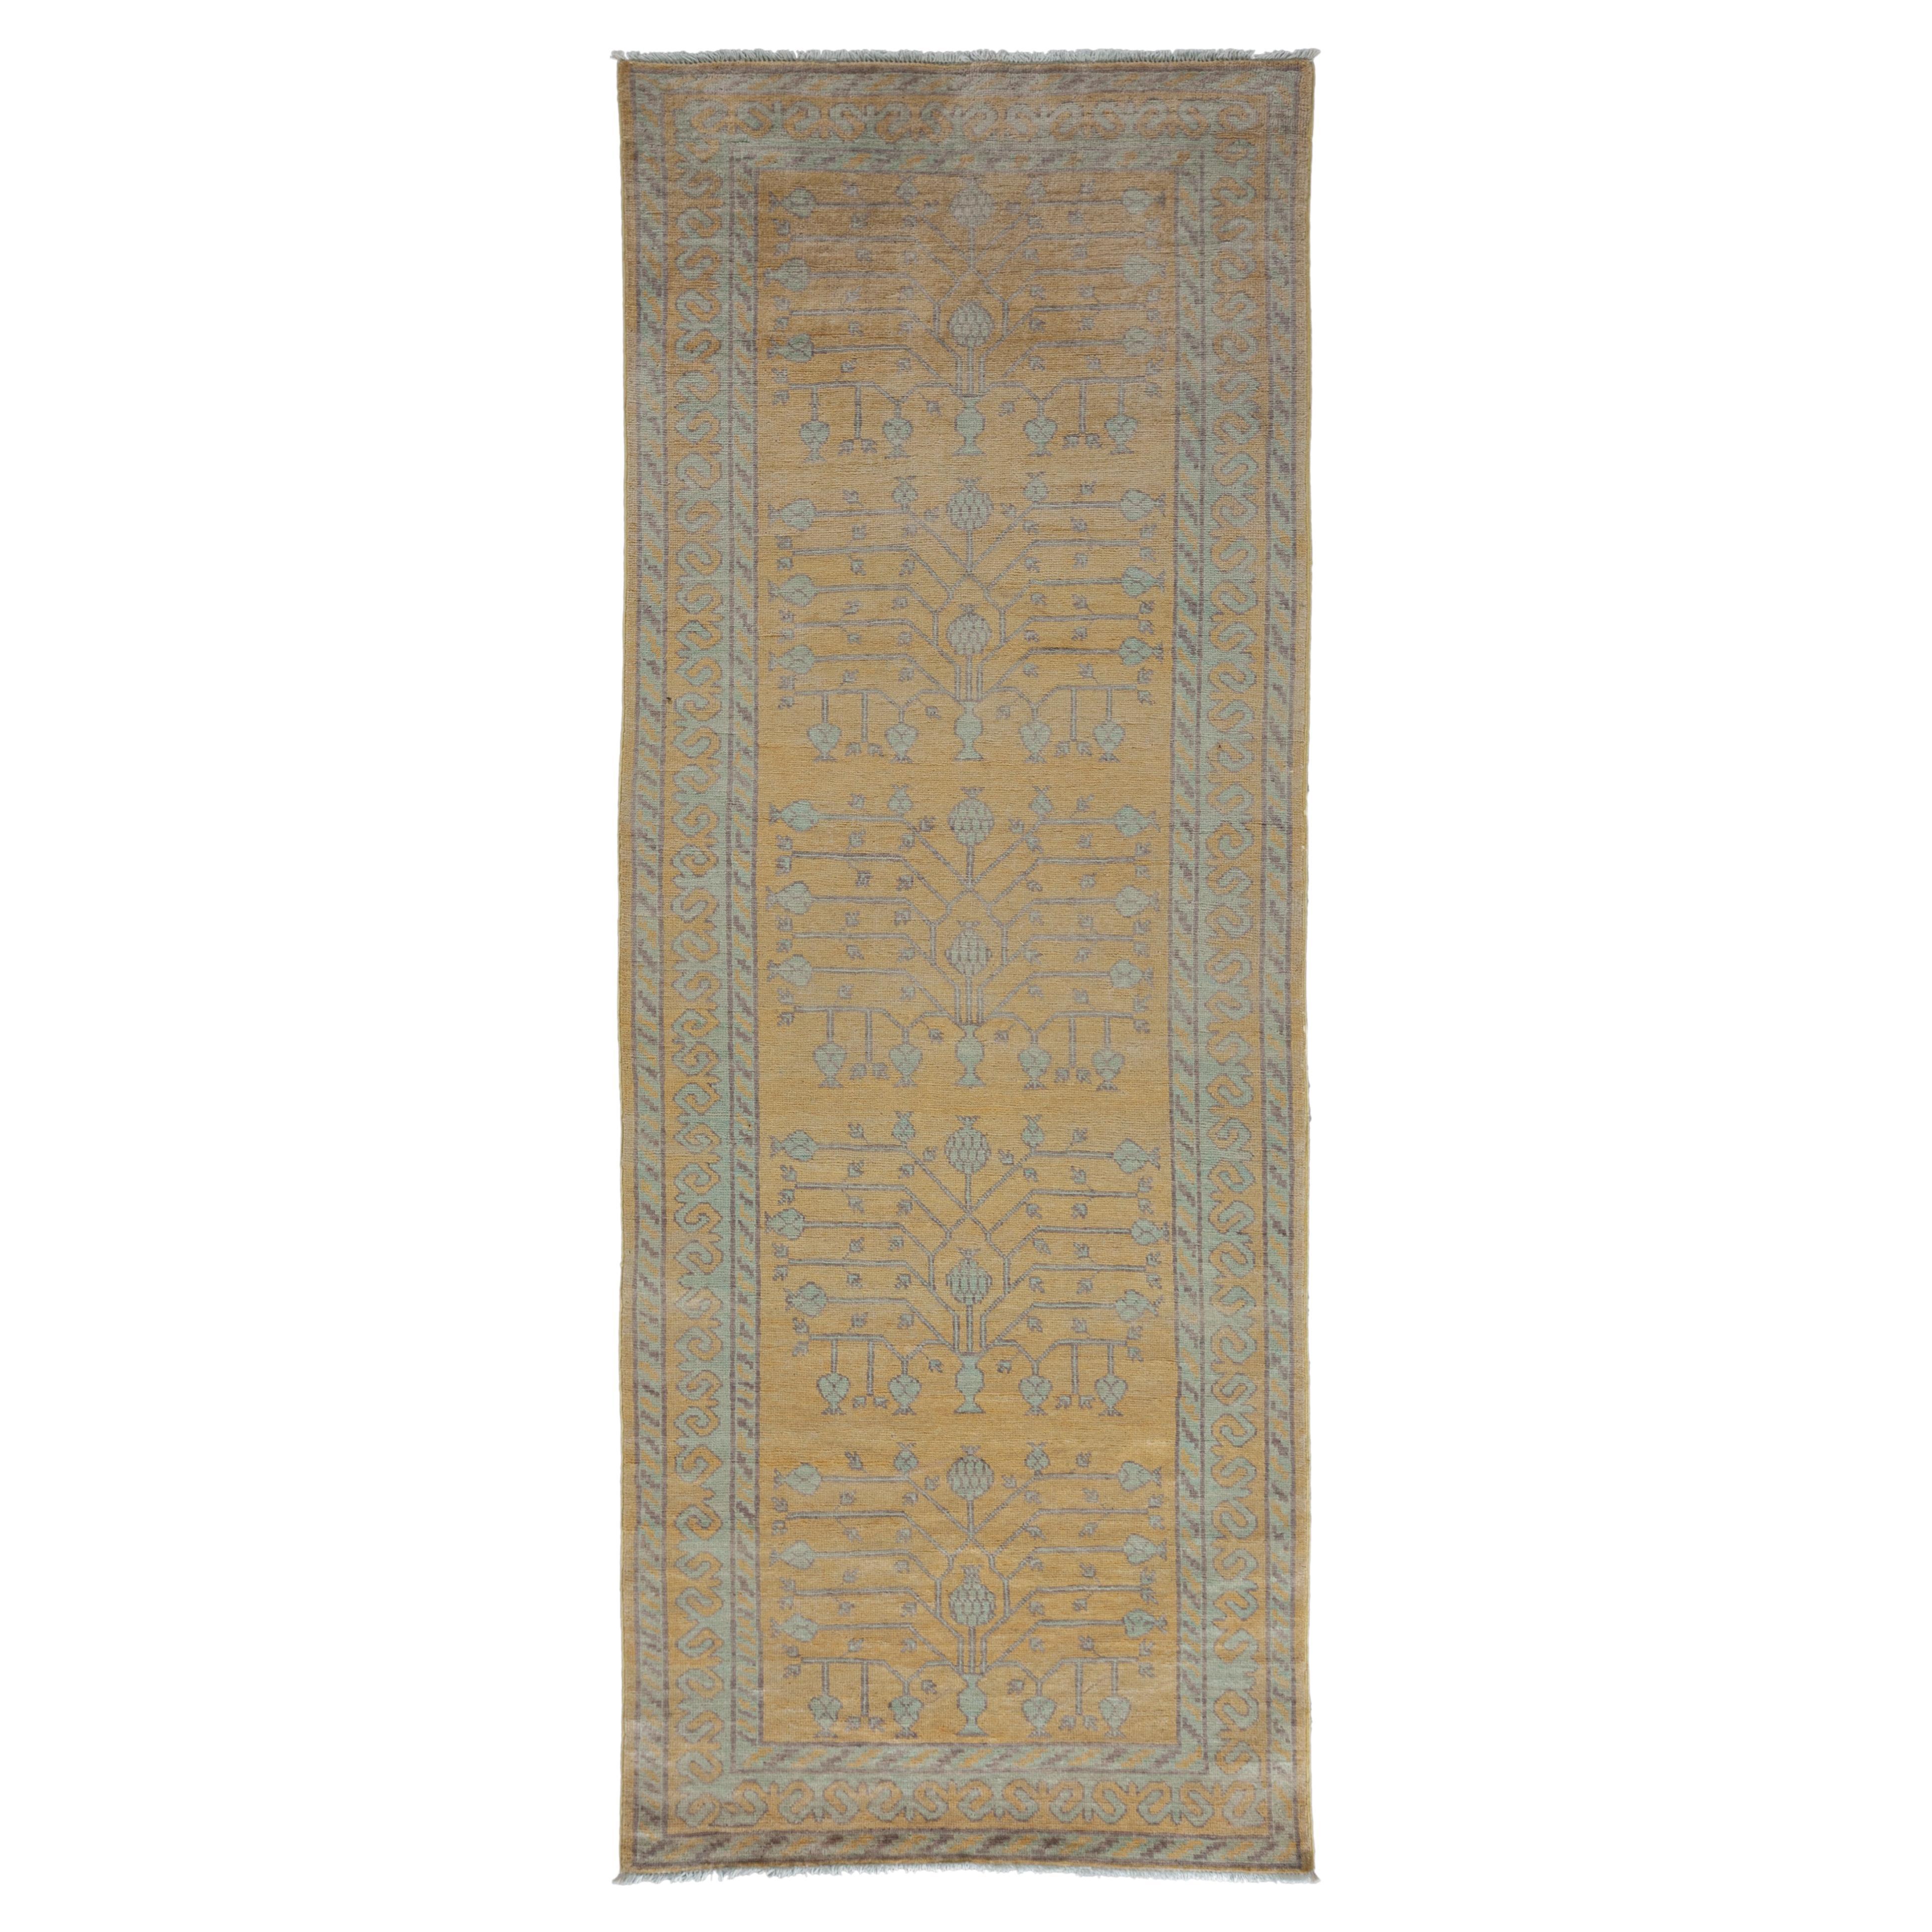 Contemporary Eclectic Hand Knotted Wool Yellow Runner